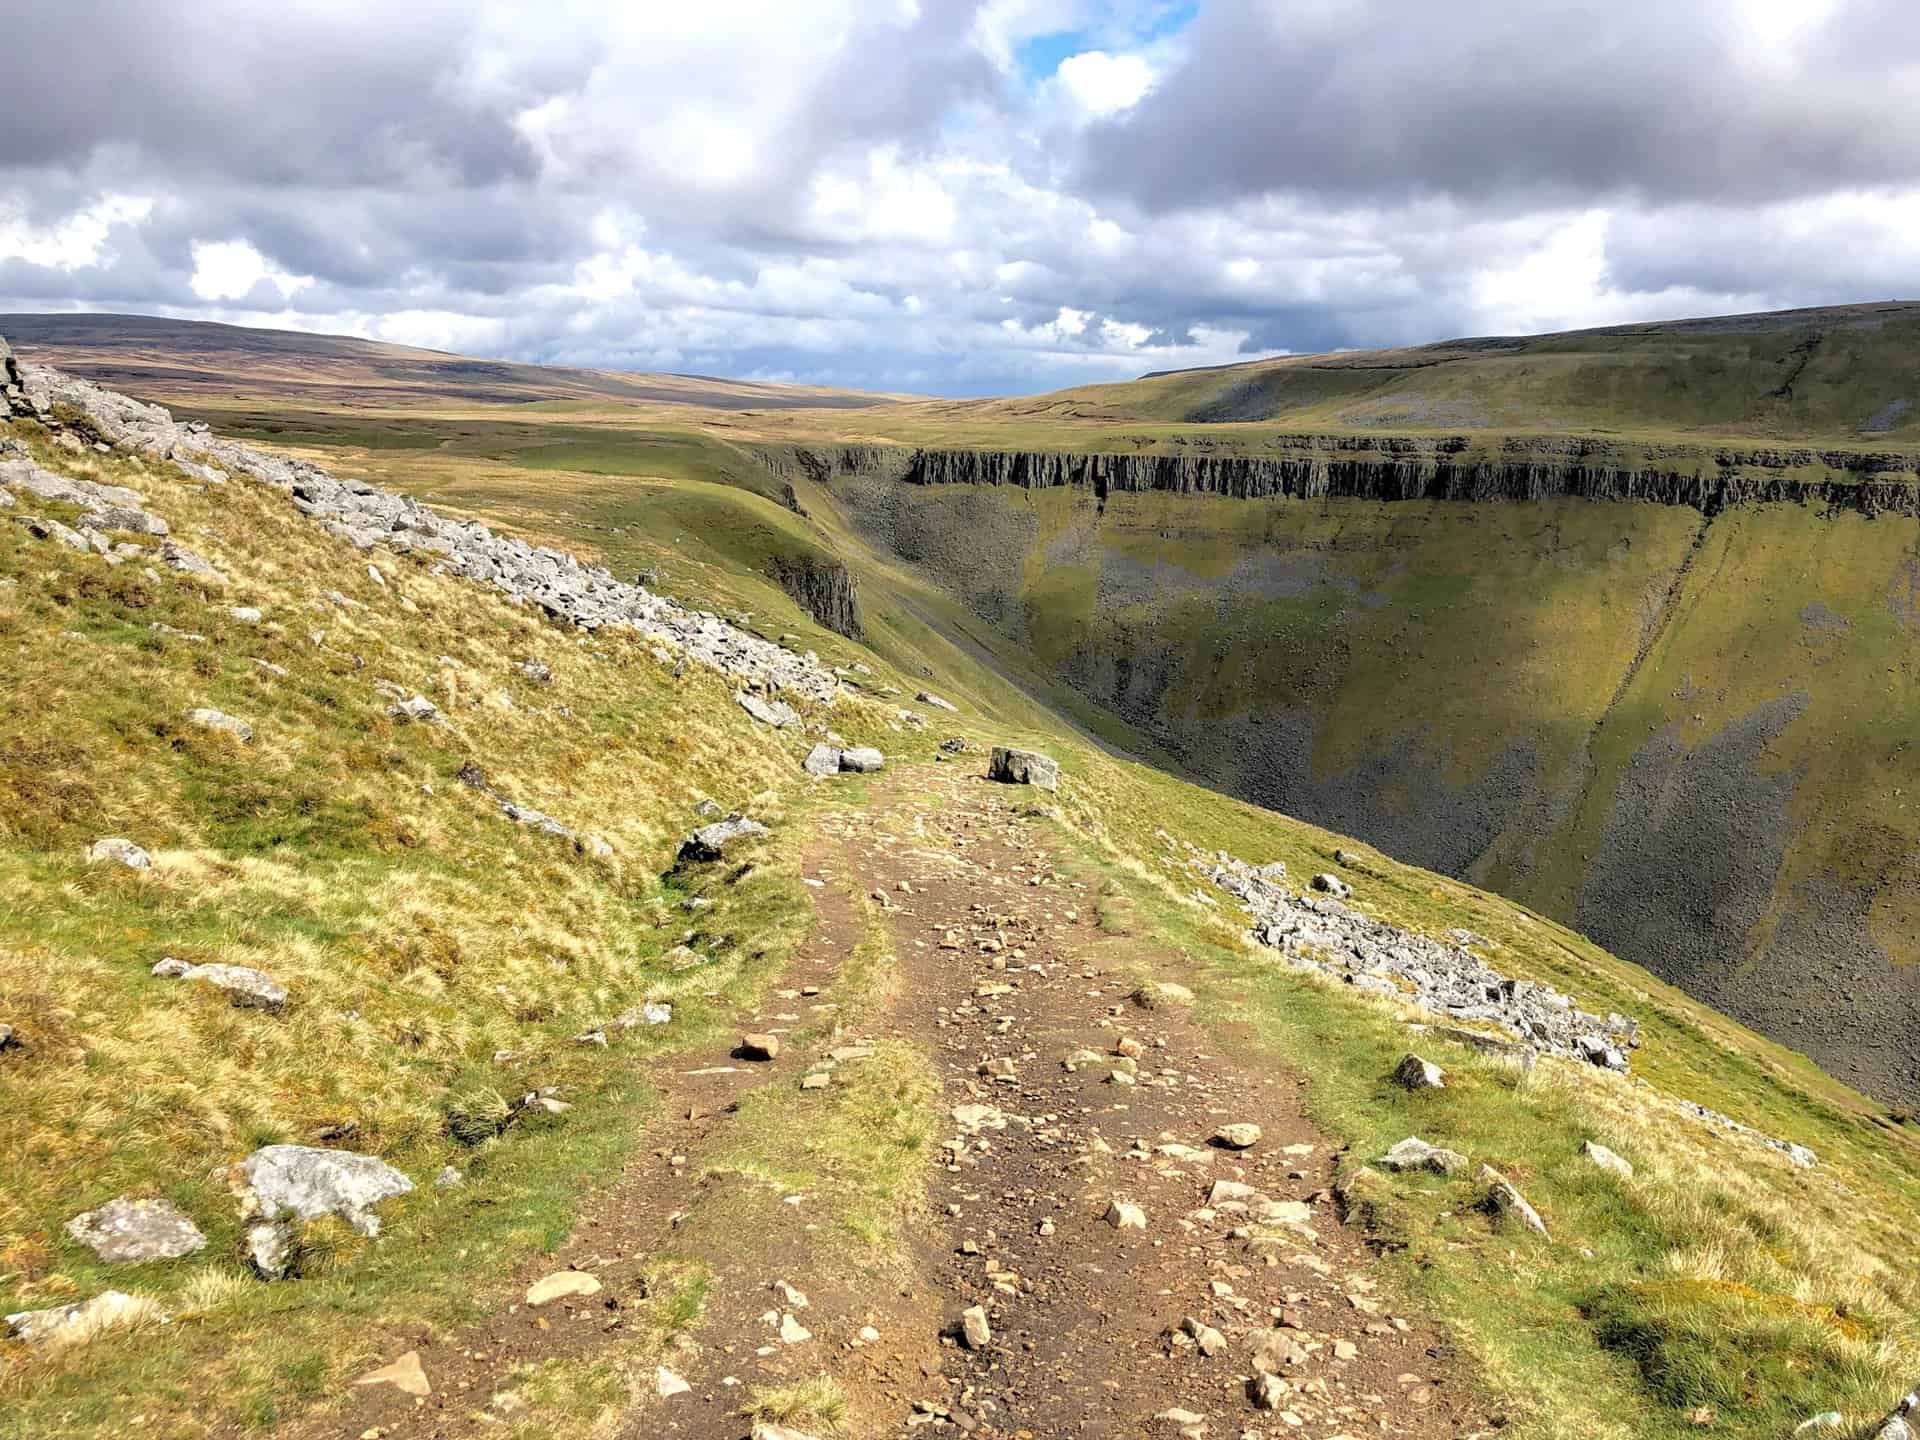 High Cup Nick and the prominent rocky outcrop of High Cup Scar are iconic landmarks that can be fully appreciated on the diverse range of North Pennines walks, offering stunning scenery and geological wonders.